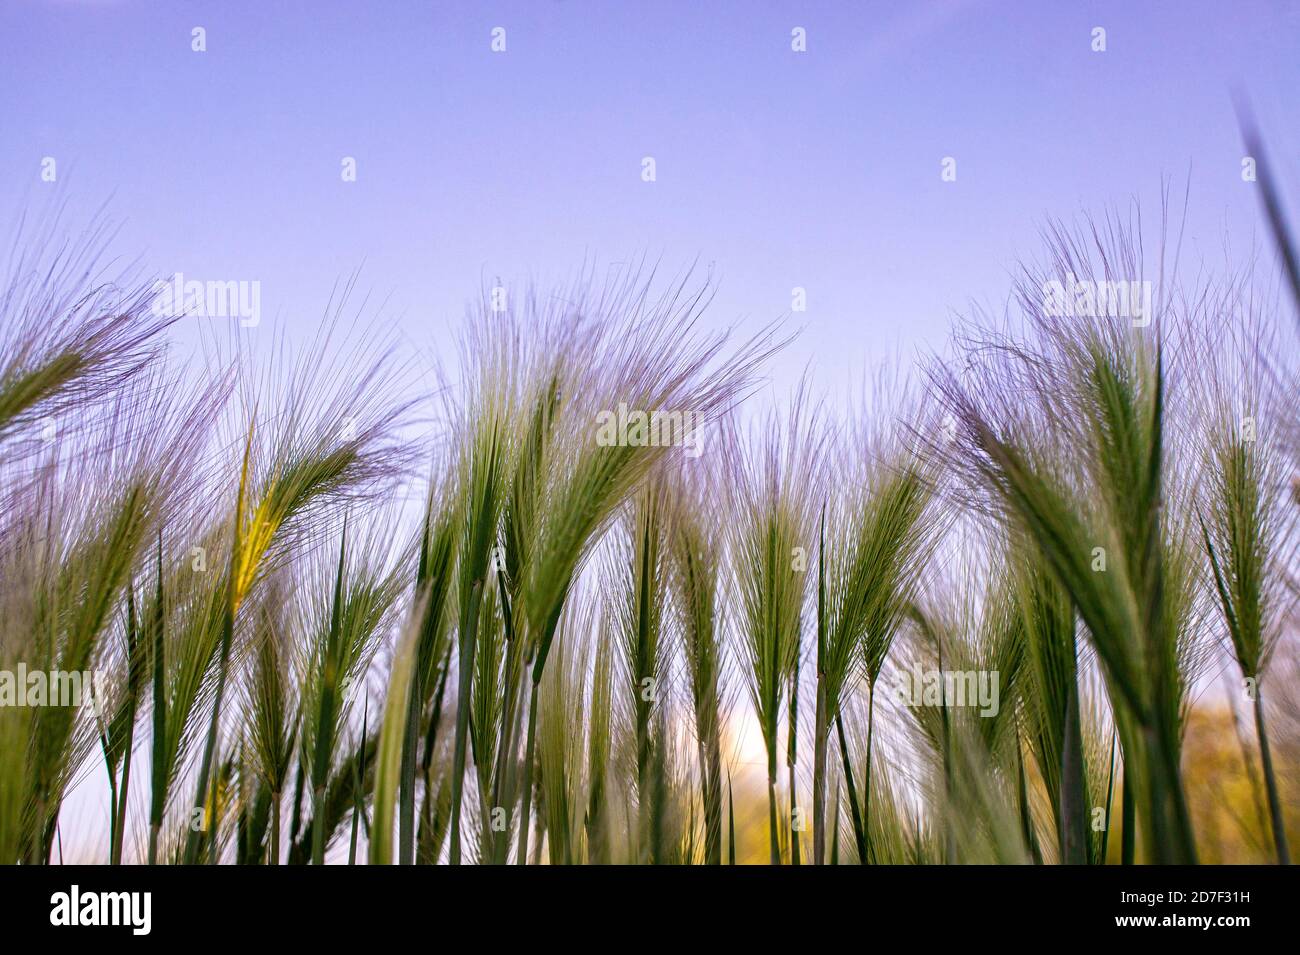 Background of fluffy spikes of green barley close-up. purple sky and barley grass. Selective focus. Hordeum jubatum, Foxtail barley Stock Photo